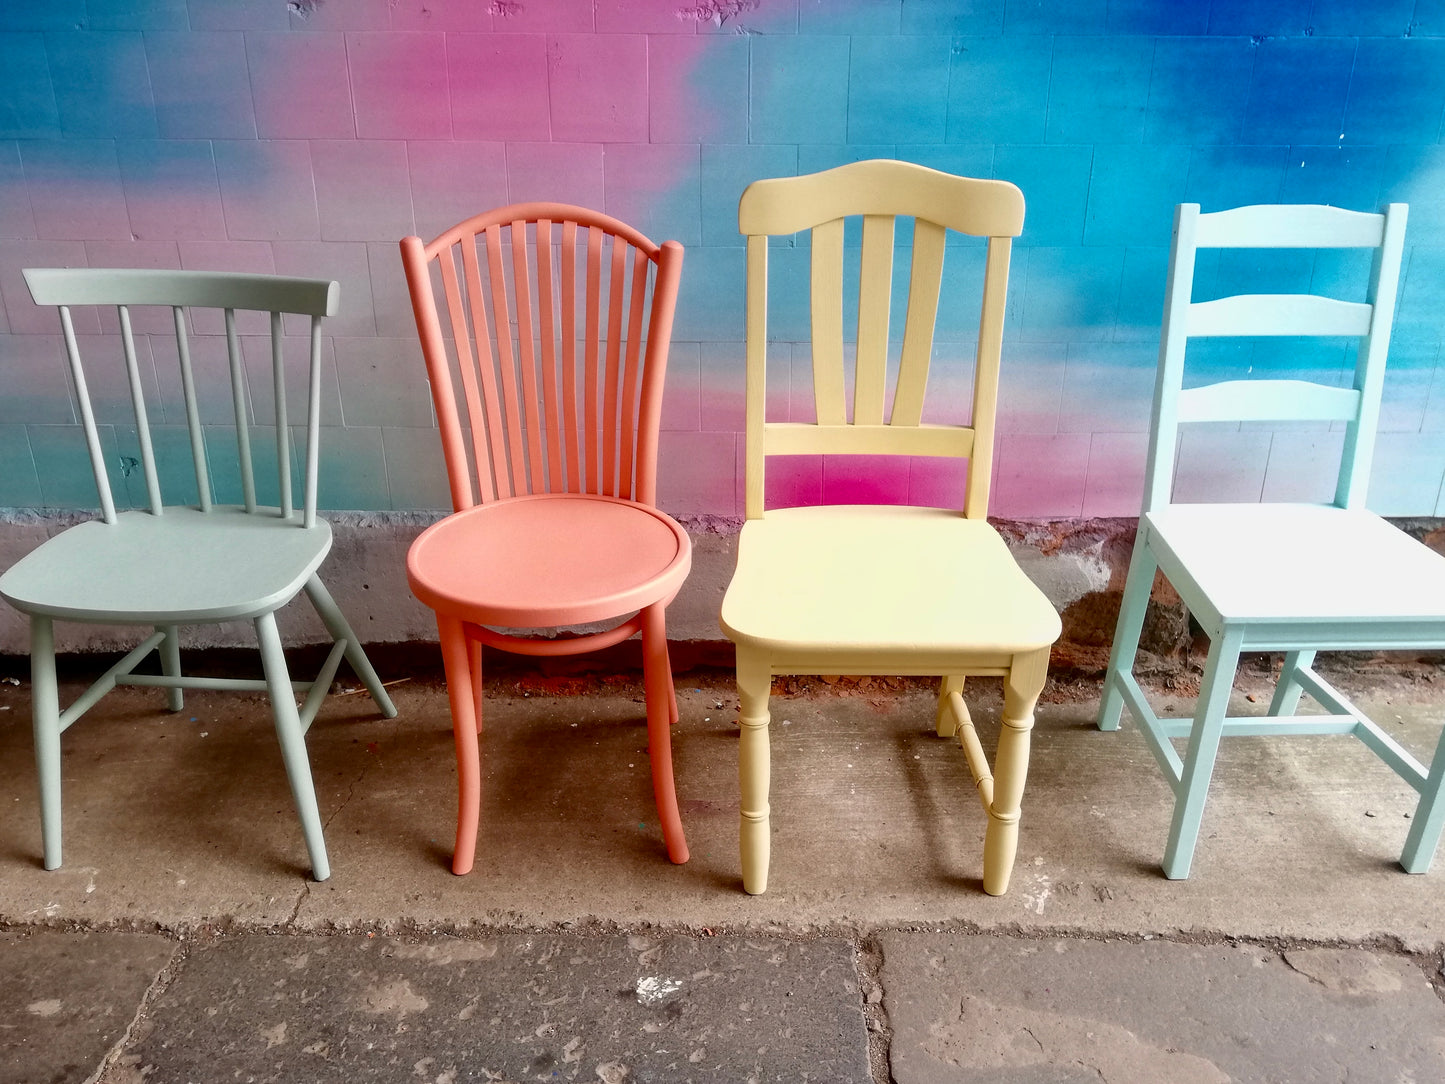 Commission for Laura 4 mismatched vintage dining chairs